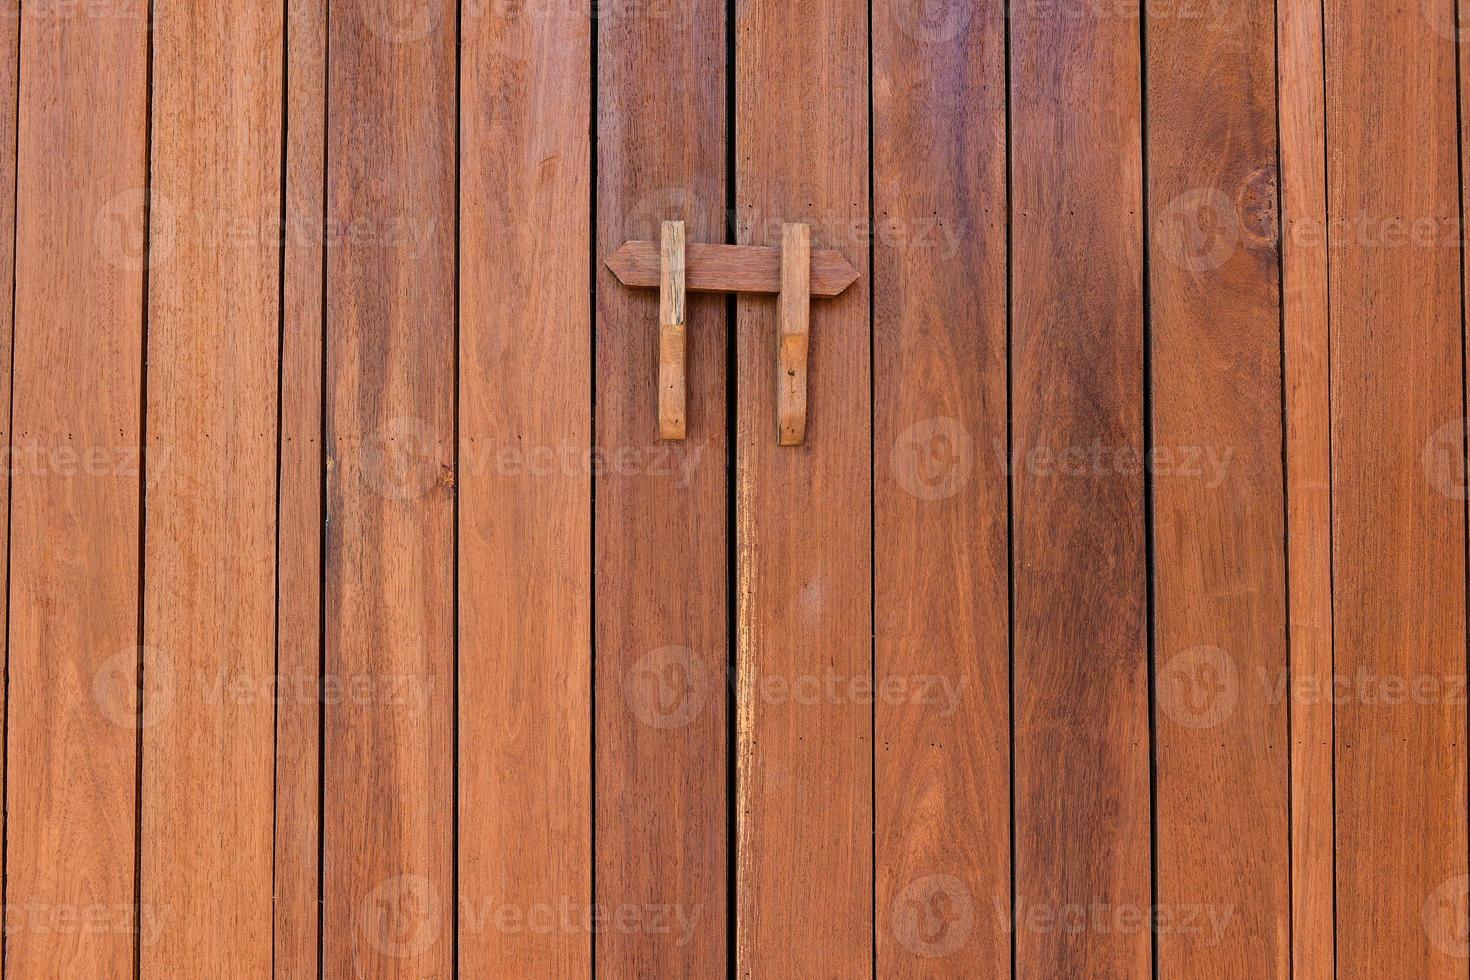 The texture of wood and lock photo